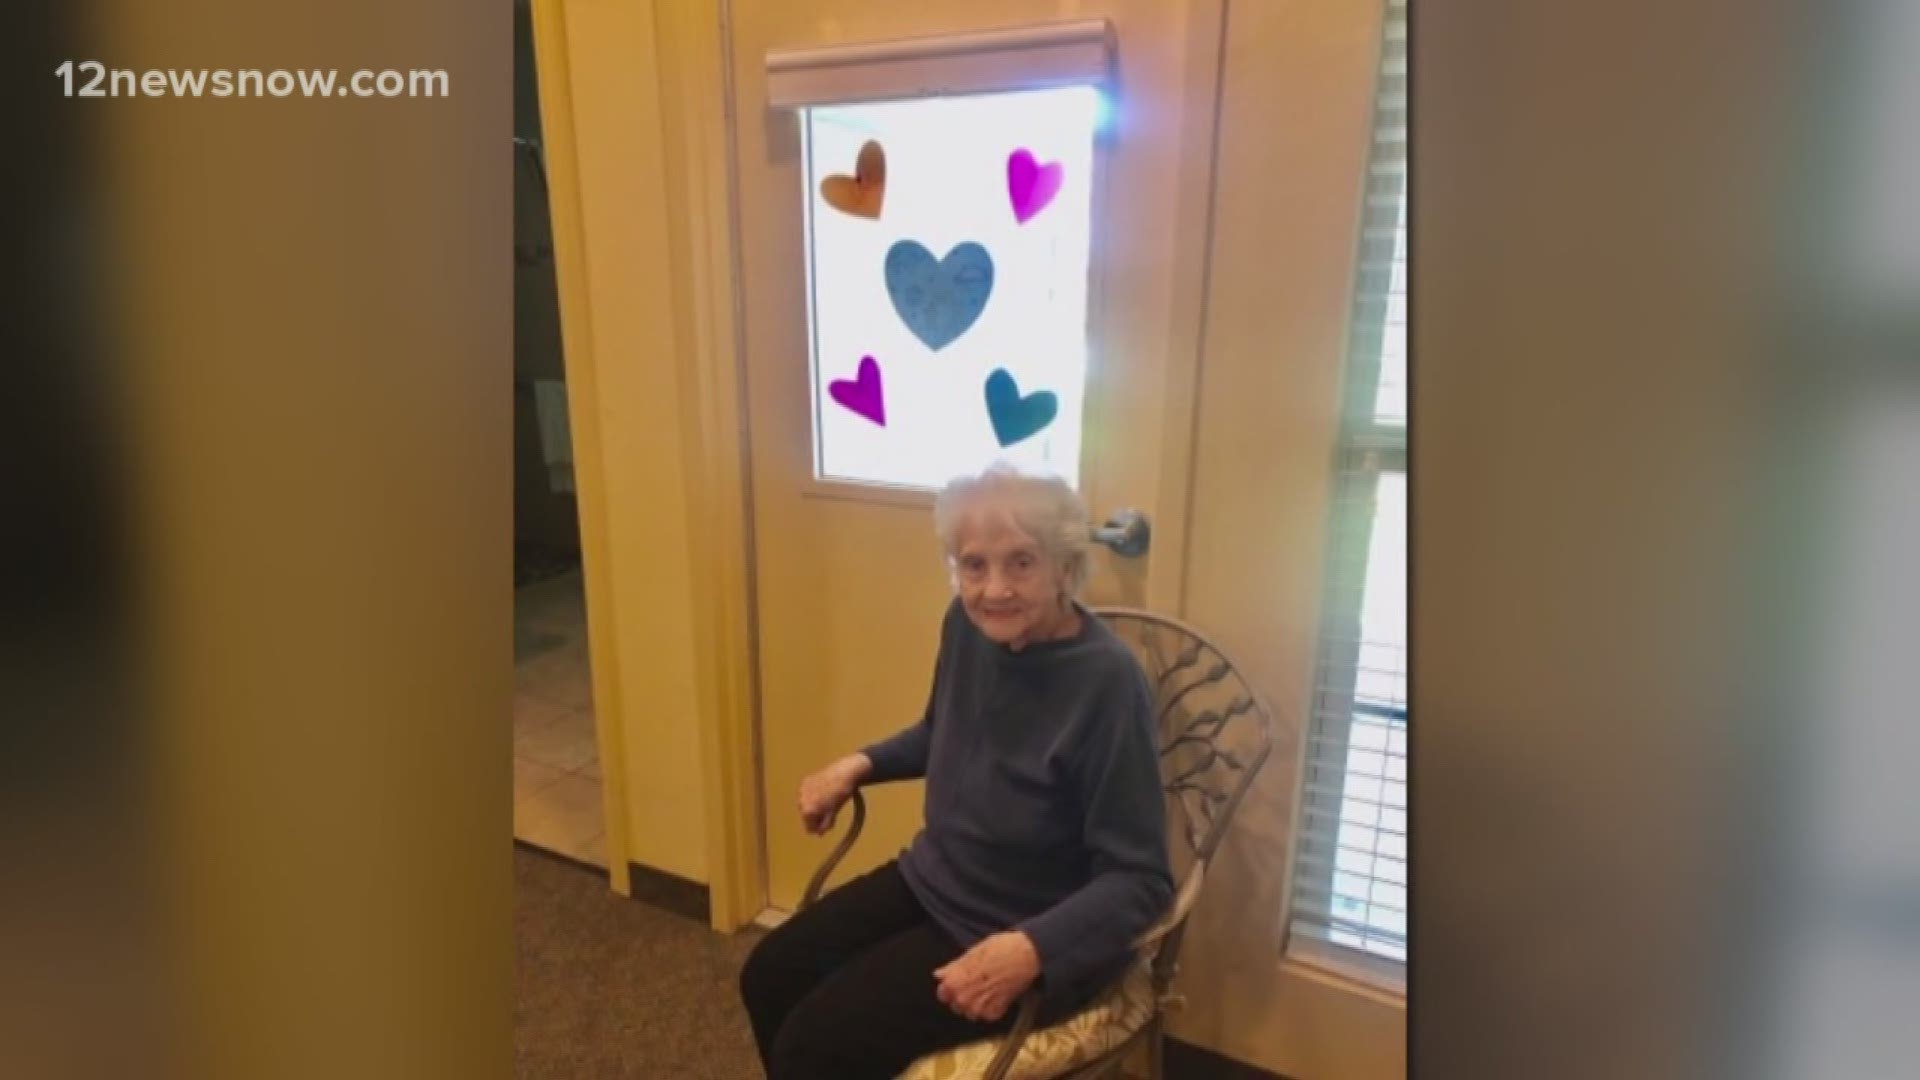 Because no family or friends are able to visit the nursing homes, some residents are having a tough time.